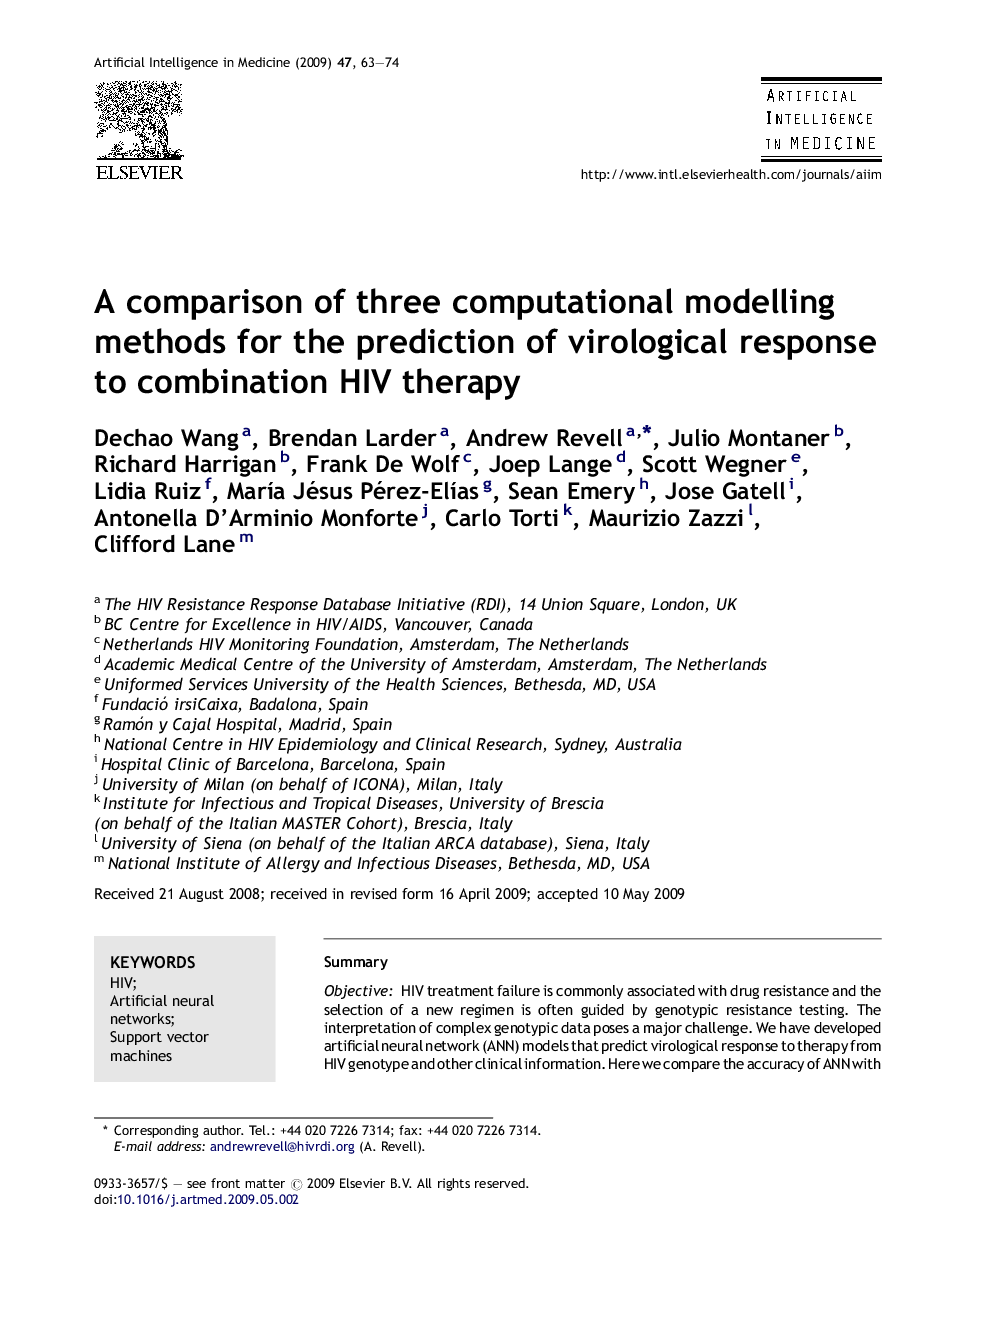 A comparison of three computational modelling methods for the prediction of virological response to combination HIV therapy